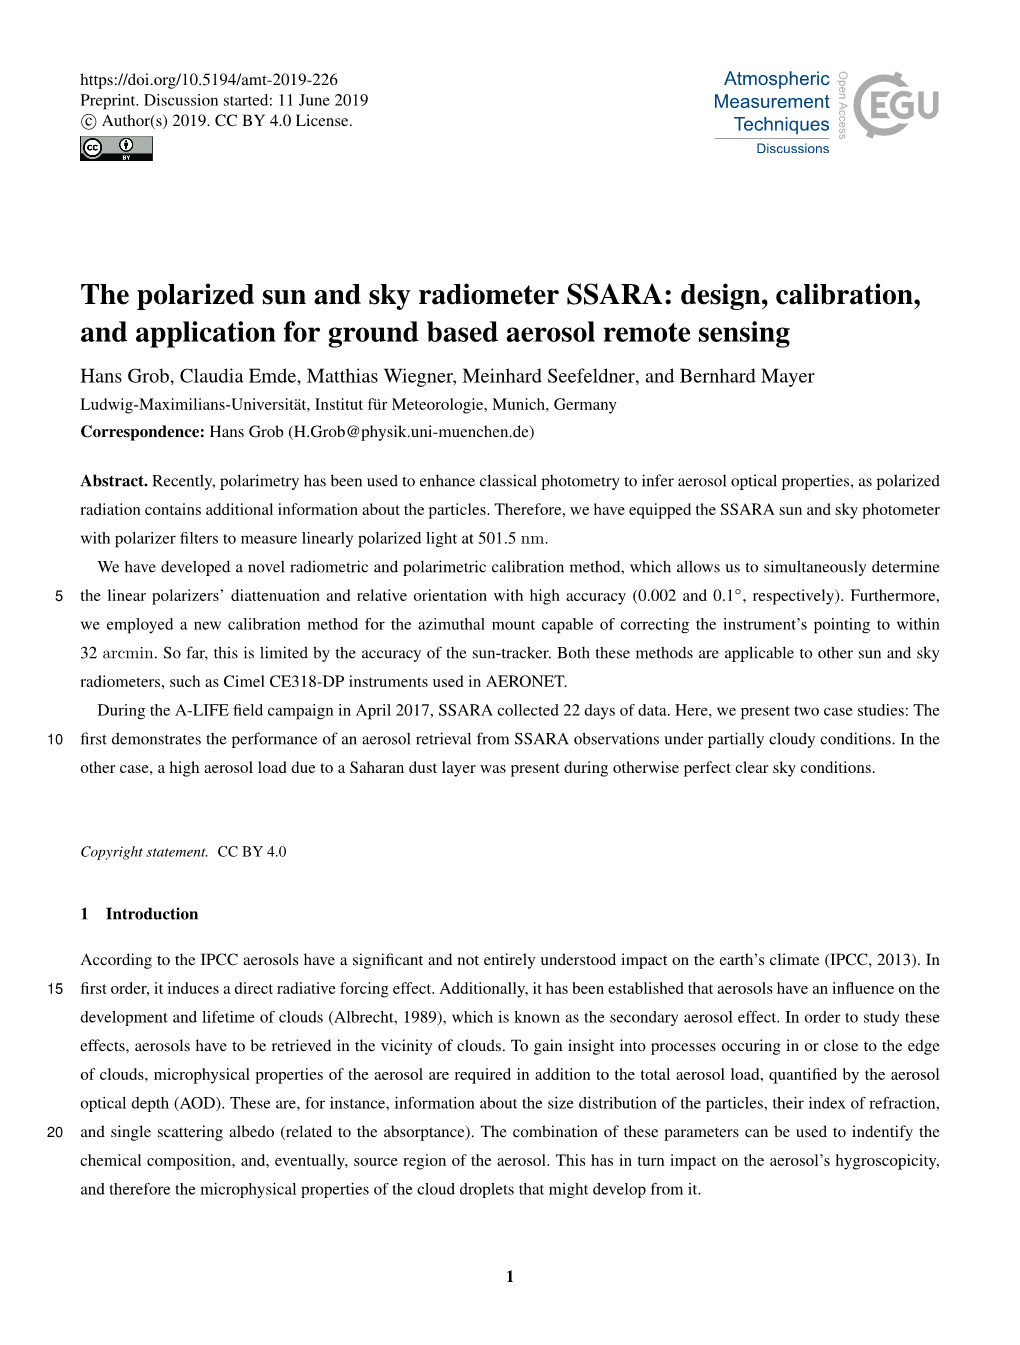 The Polarized Sun and Sky Radiometer SSARA: Design, Calibration, and Application for Ground Based Aerosol Remote Sensing